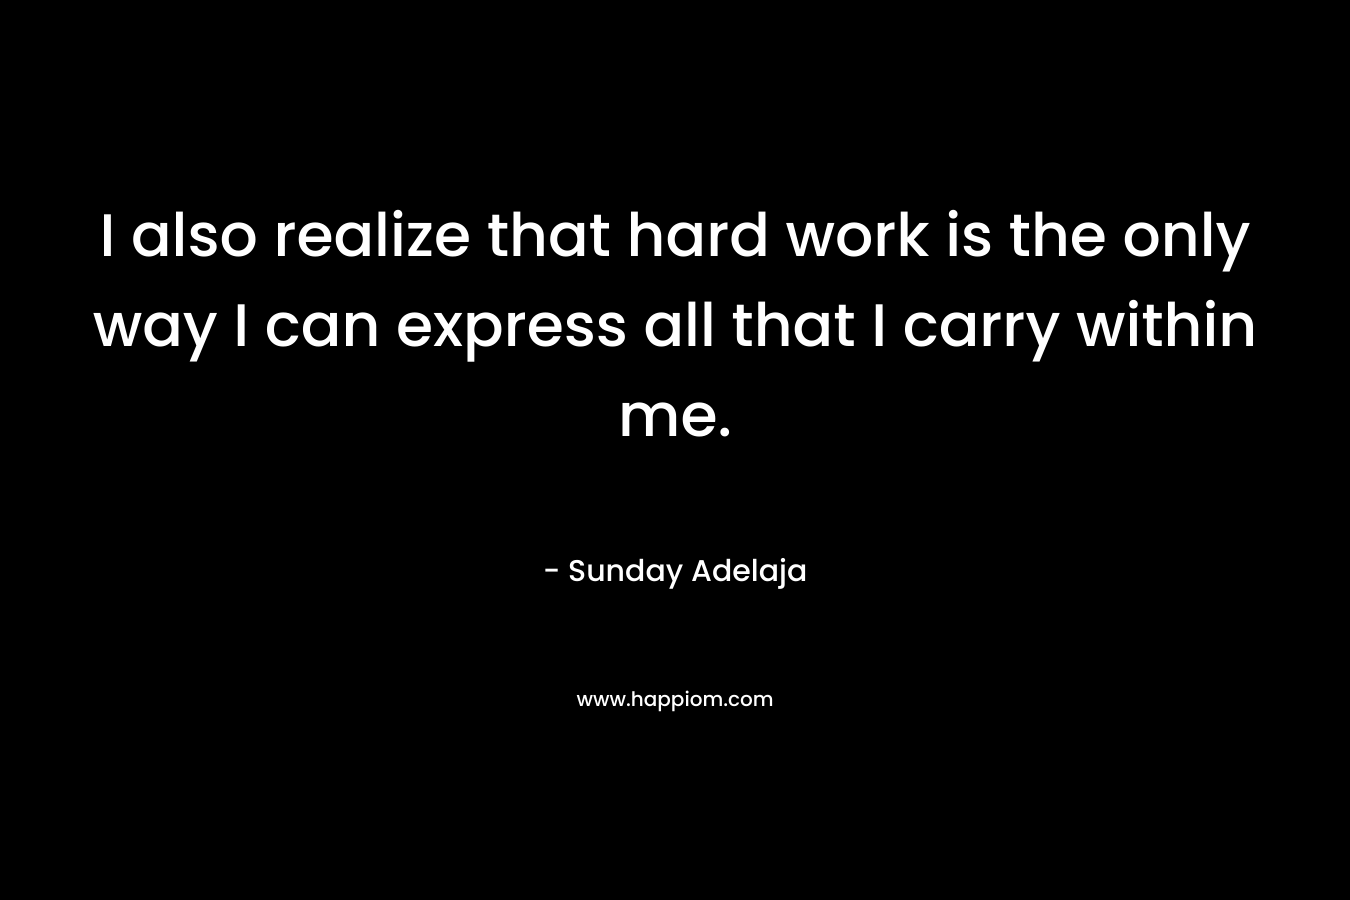 I also realize that hard work is the only way I can express all that I carry within me.